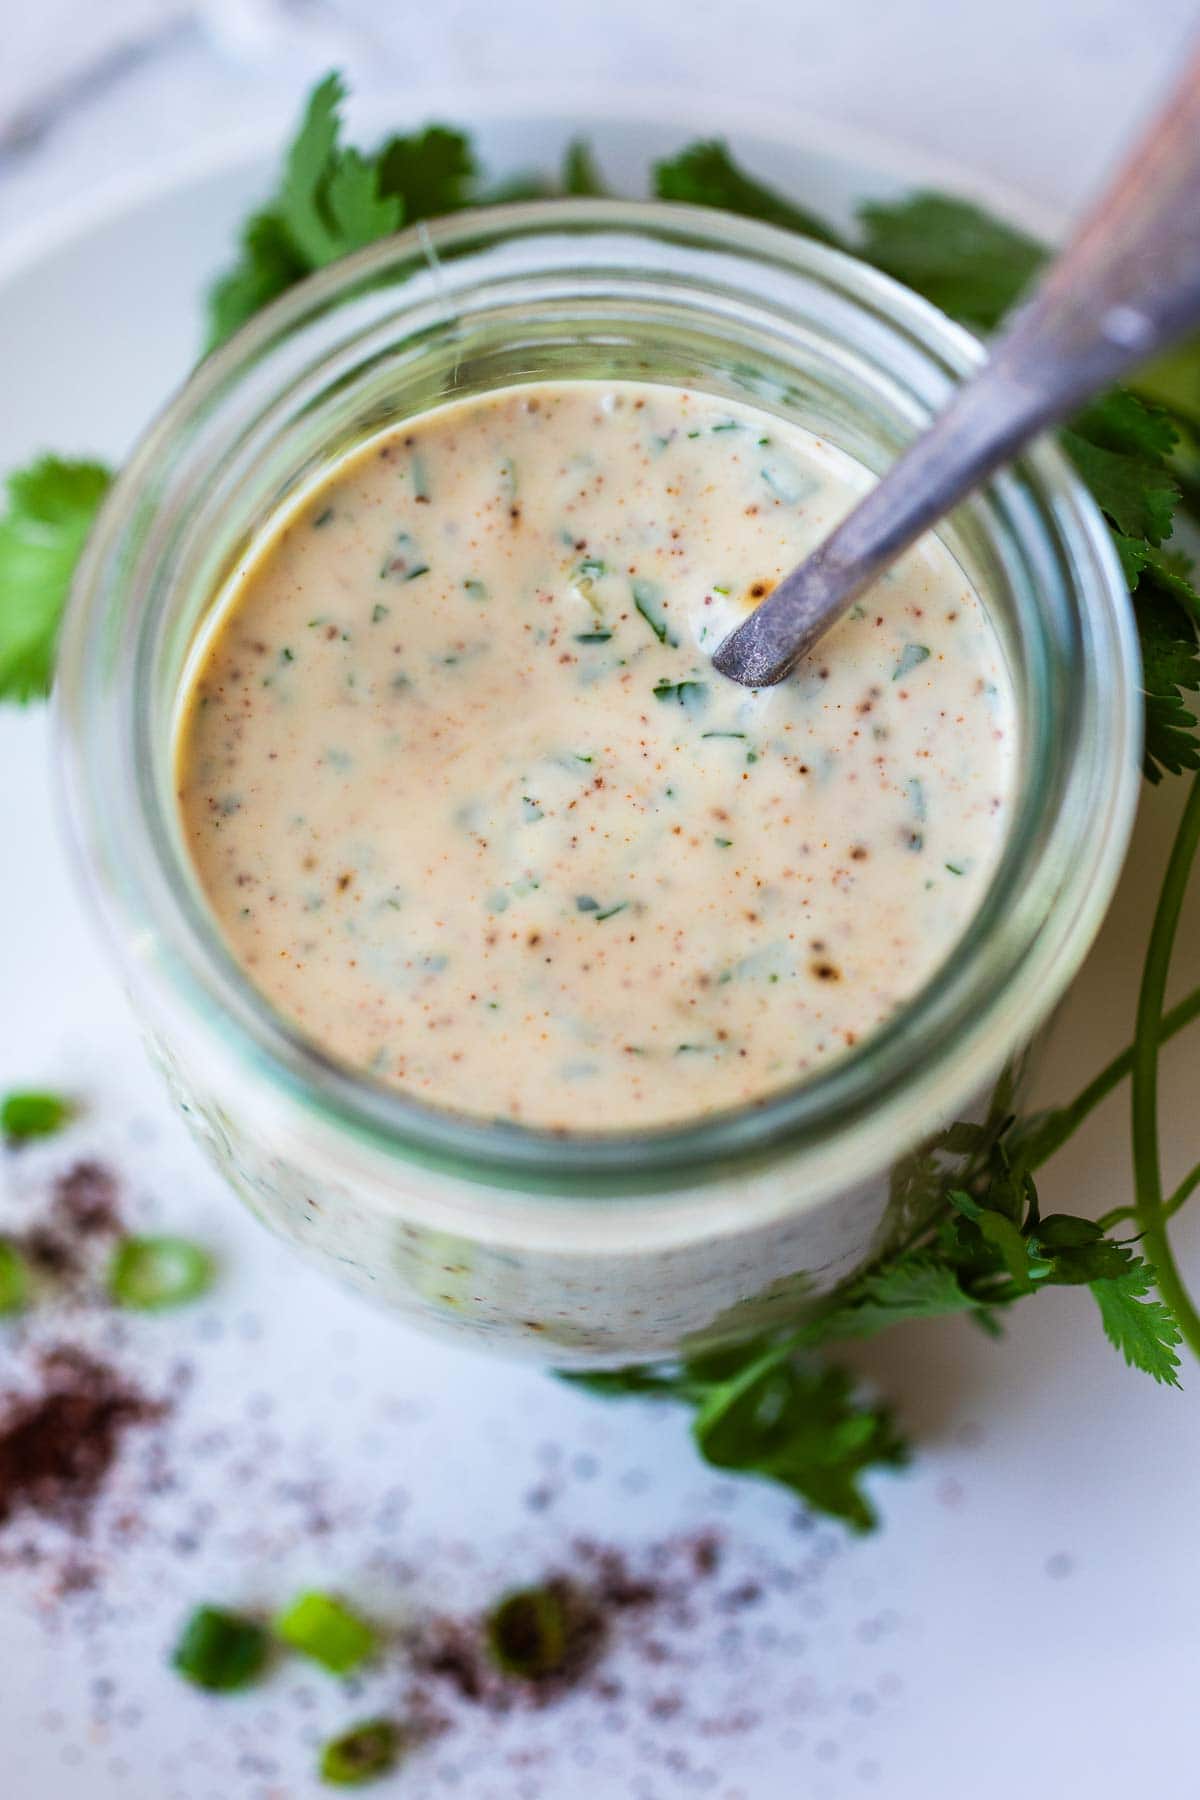 Creamy and smoky, homemade Chipotle Ranch Dressing takes things up a notch. With fresh lime juice, herbs and just the right amount of chipotle pepper kick, this zesty dressing is also delicious as a dip or a spread! Vegan adaptable and gluten-free!